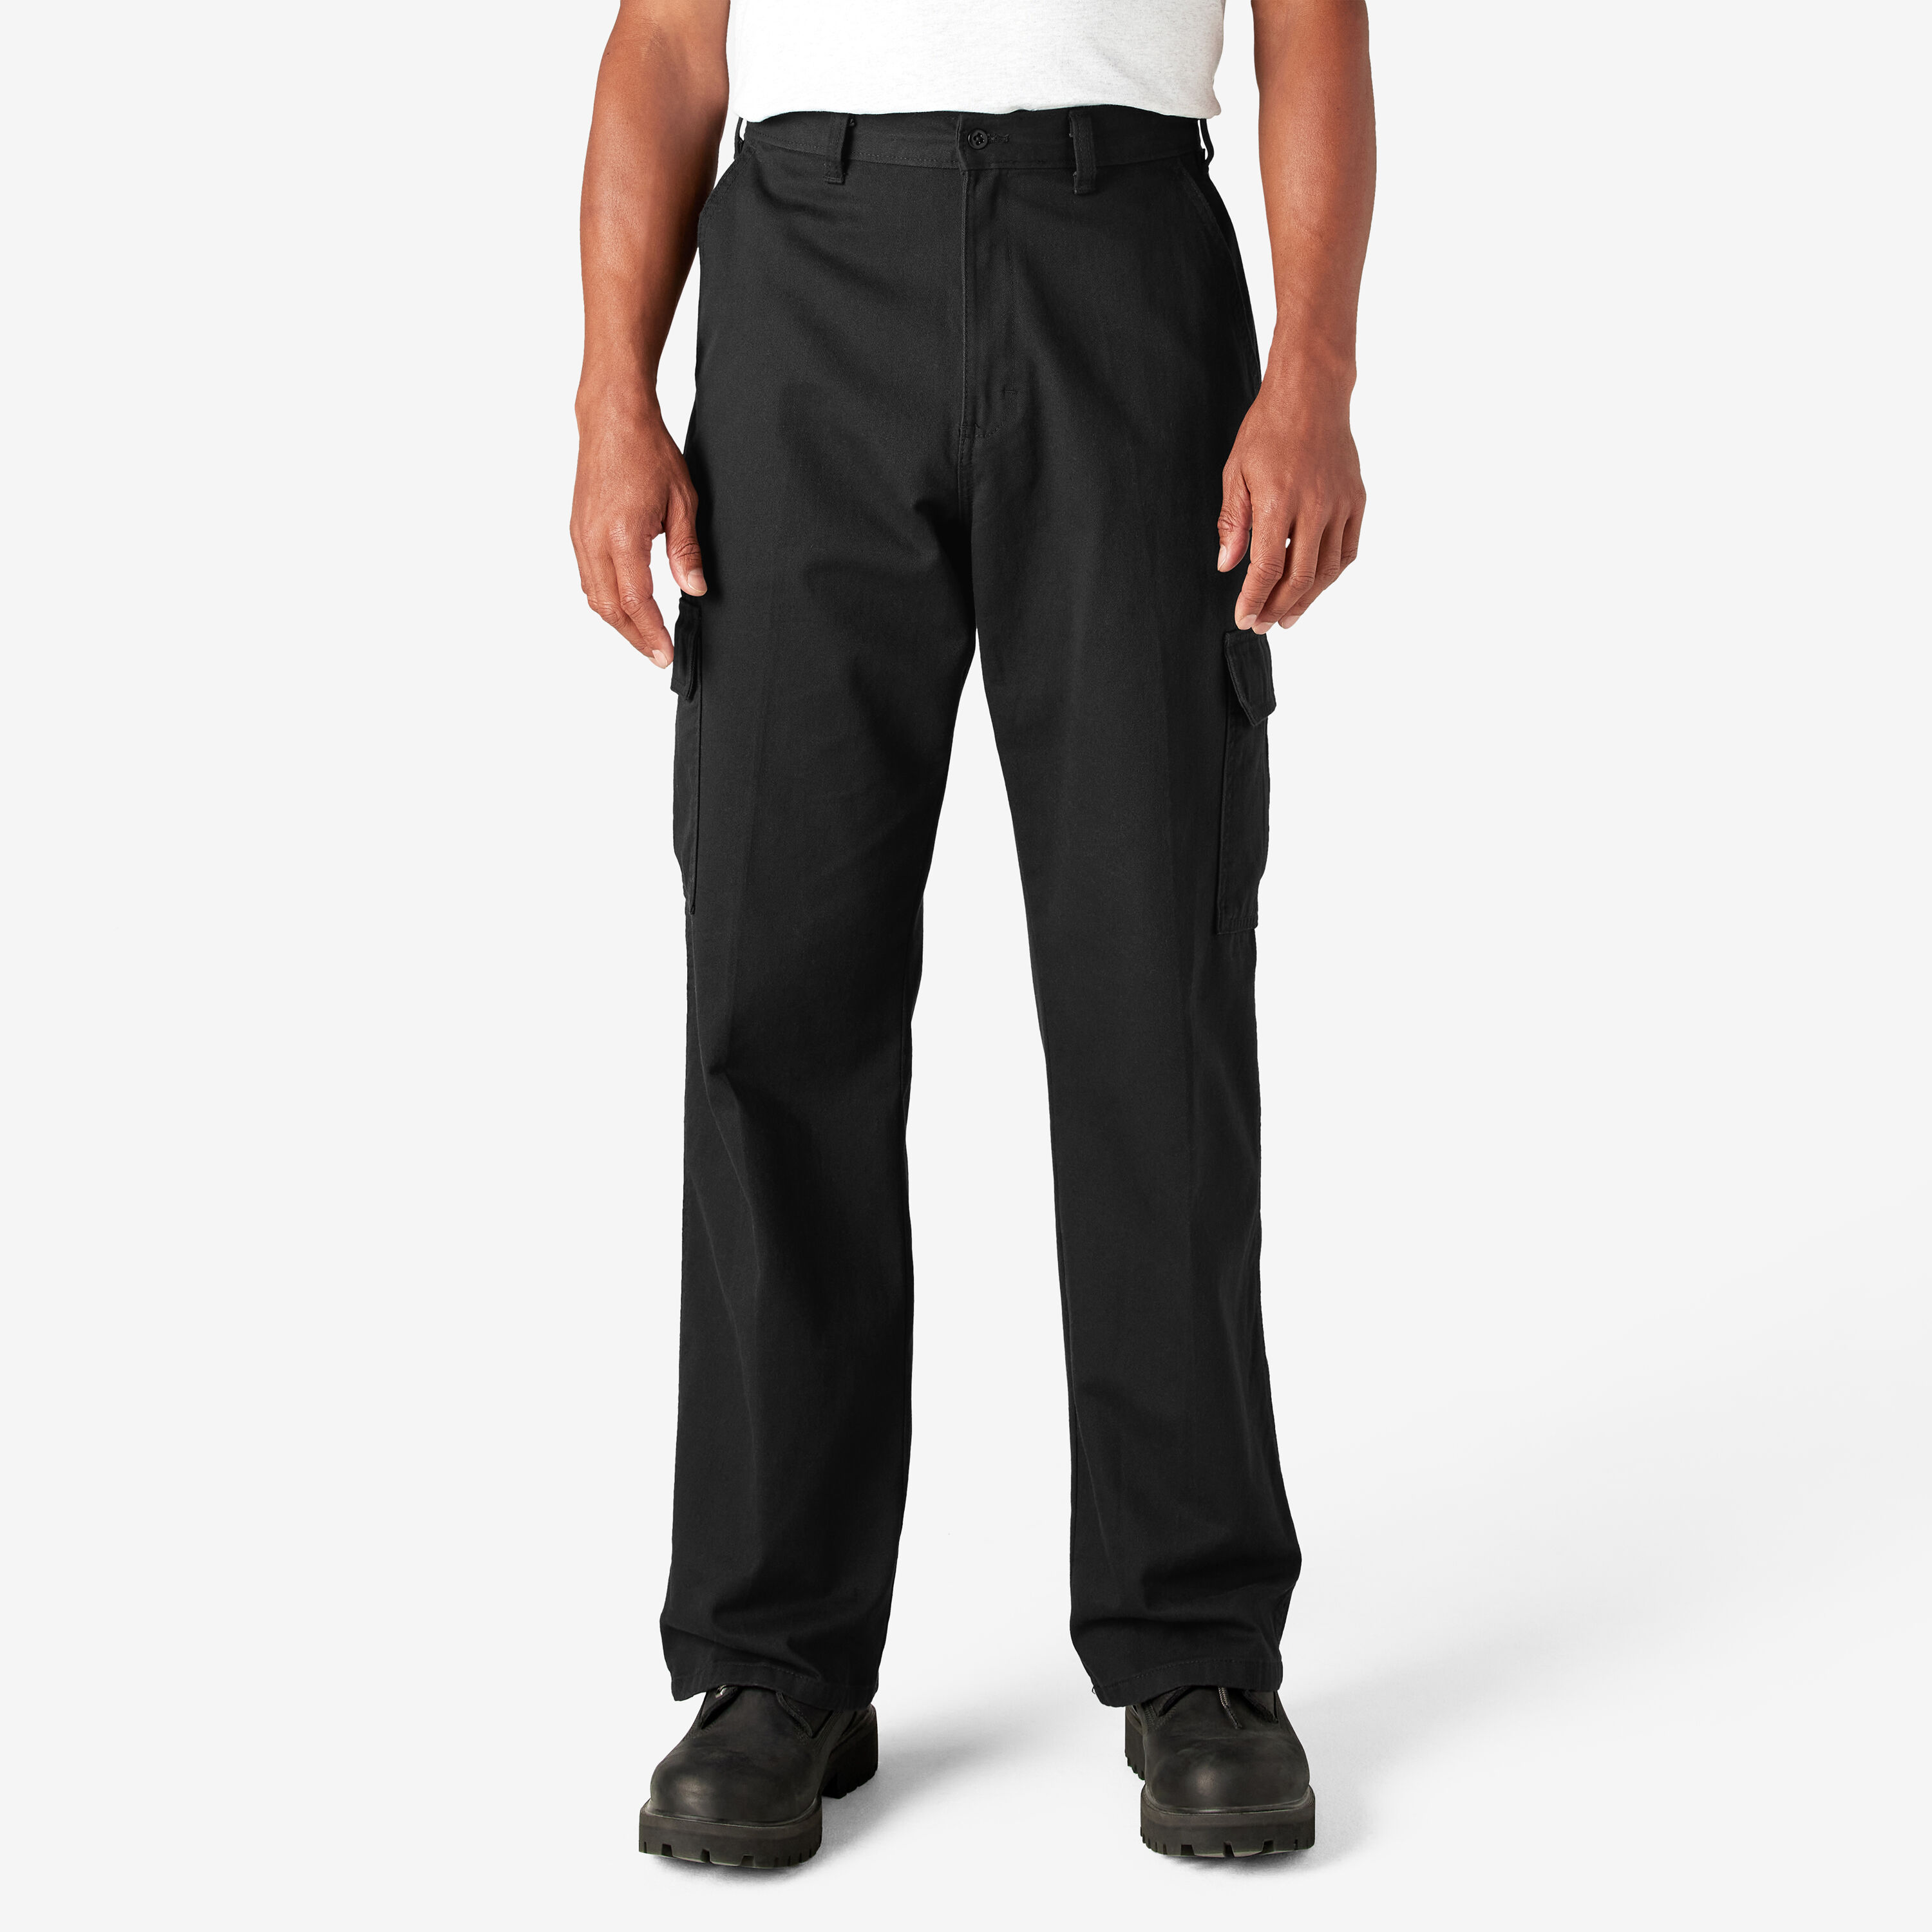 Slacks and Chinos Mens Trousers Slacks and Chinos Dickies Construct Trousers Dickies Construct Cotton Trousers Black for Men 